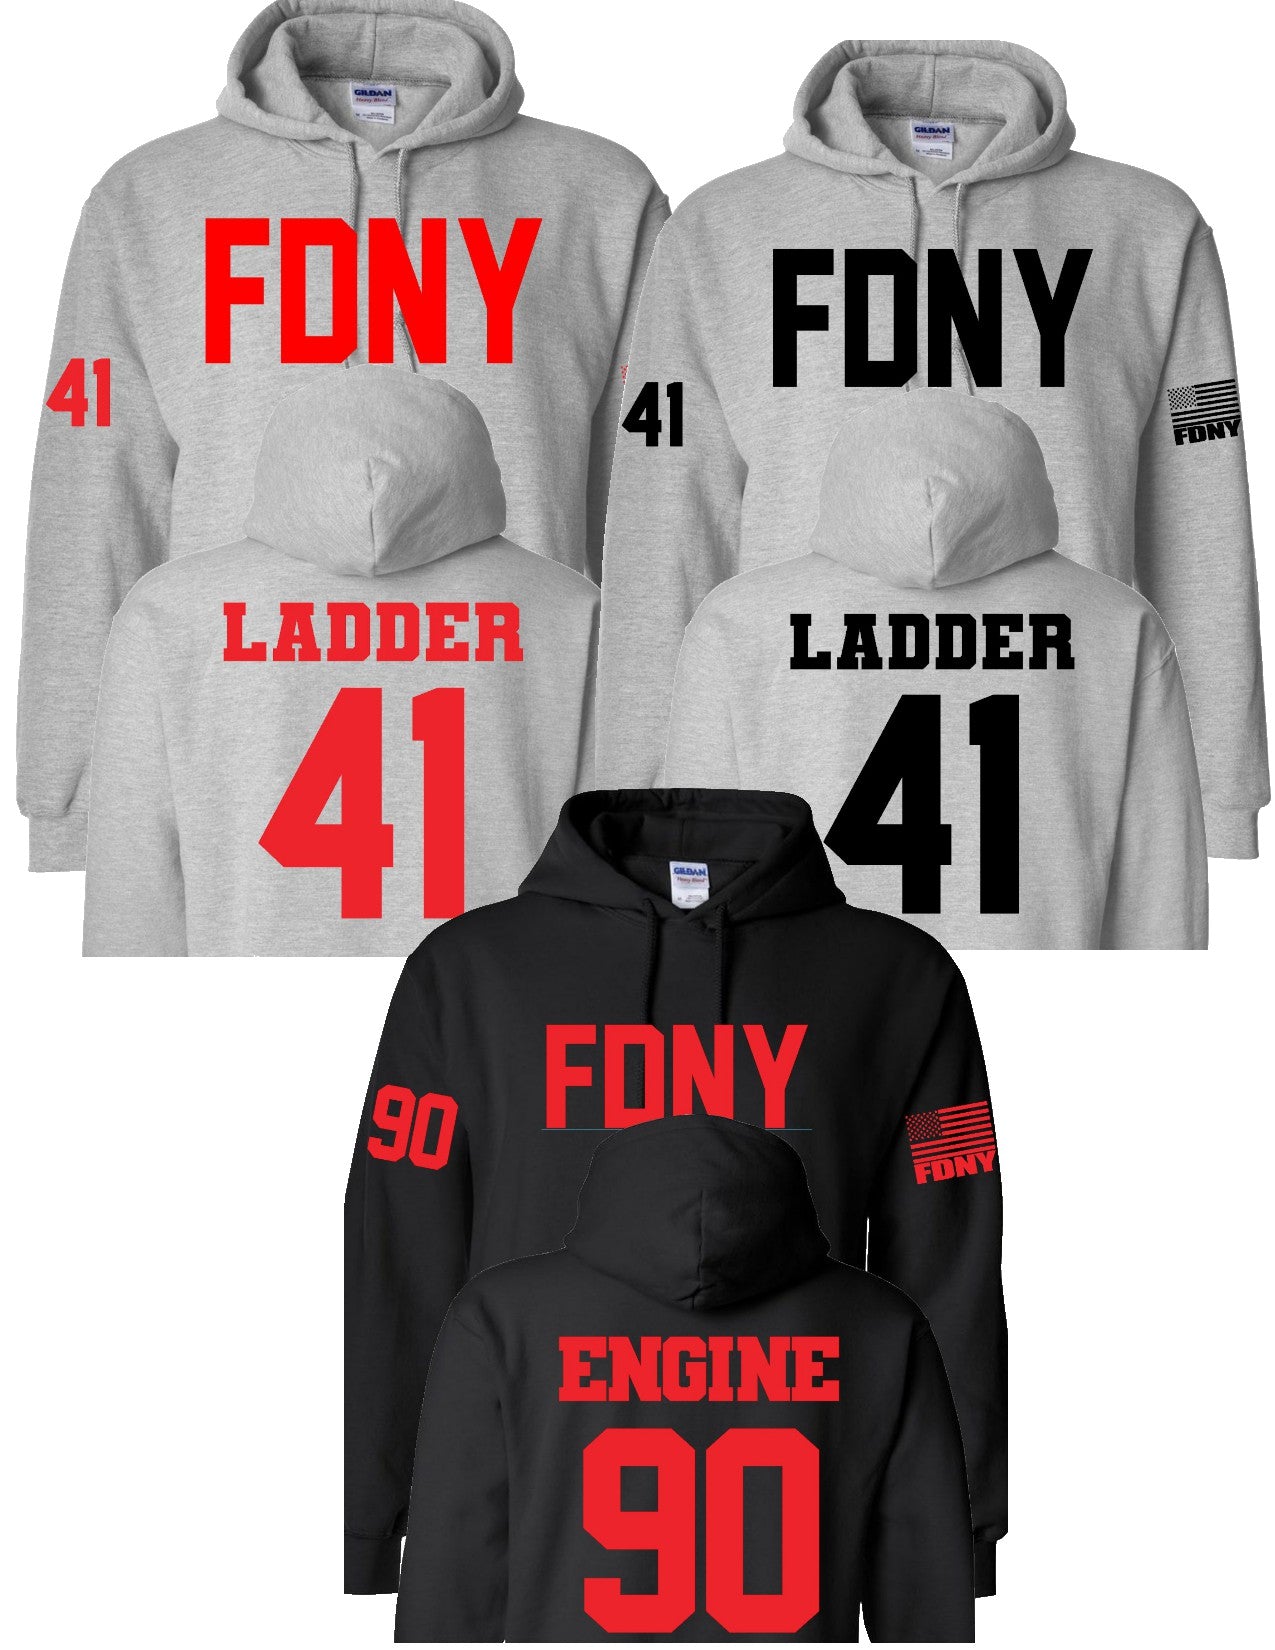 We have a couple jersey's and hoodies - FDNY Hockey Team